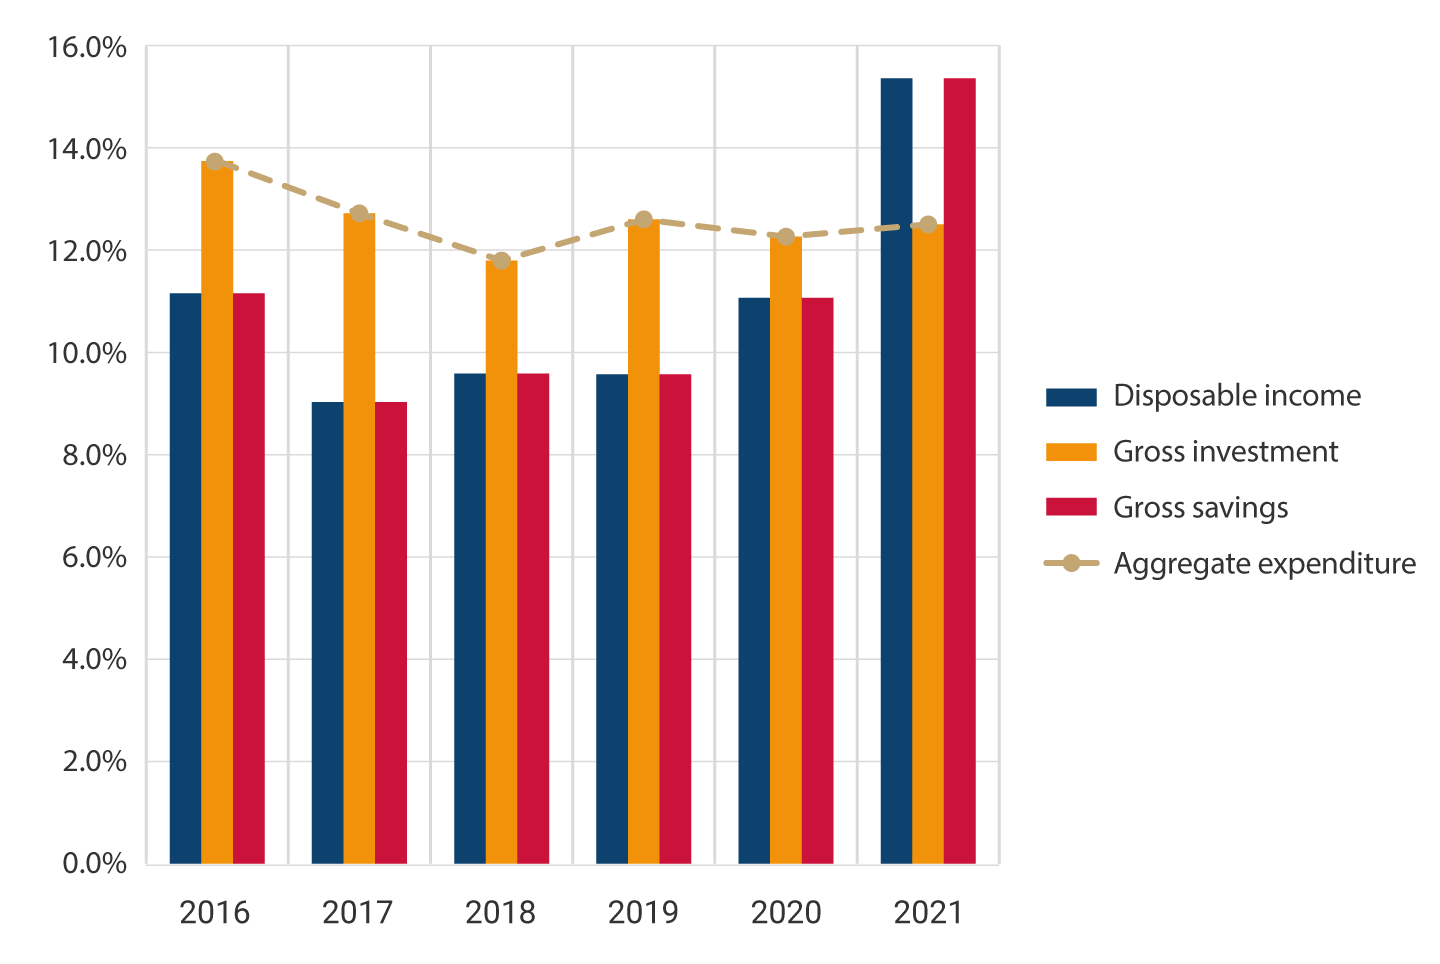 The graph shows the evolution between 2016 and 2021 of the balance sheet of non-financial corporations, as a percentage of nominal GDP, by components: disposable income, gross investment, gross savings, and aggregate spending. Throughout the analyzed period, the disposable income balances coincide each year with those of gross savings, while the gross investment balances coincide with those of aggregate spending. For the year 2021, an increase in the disposable income and gross savings balances up to 15.4% stands out.